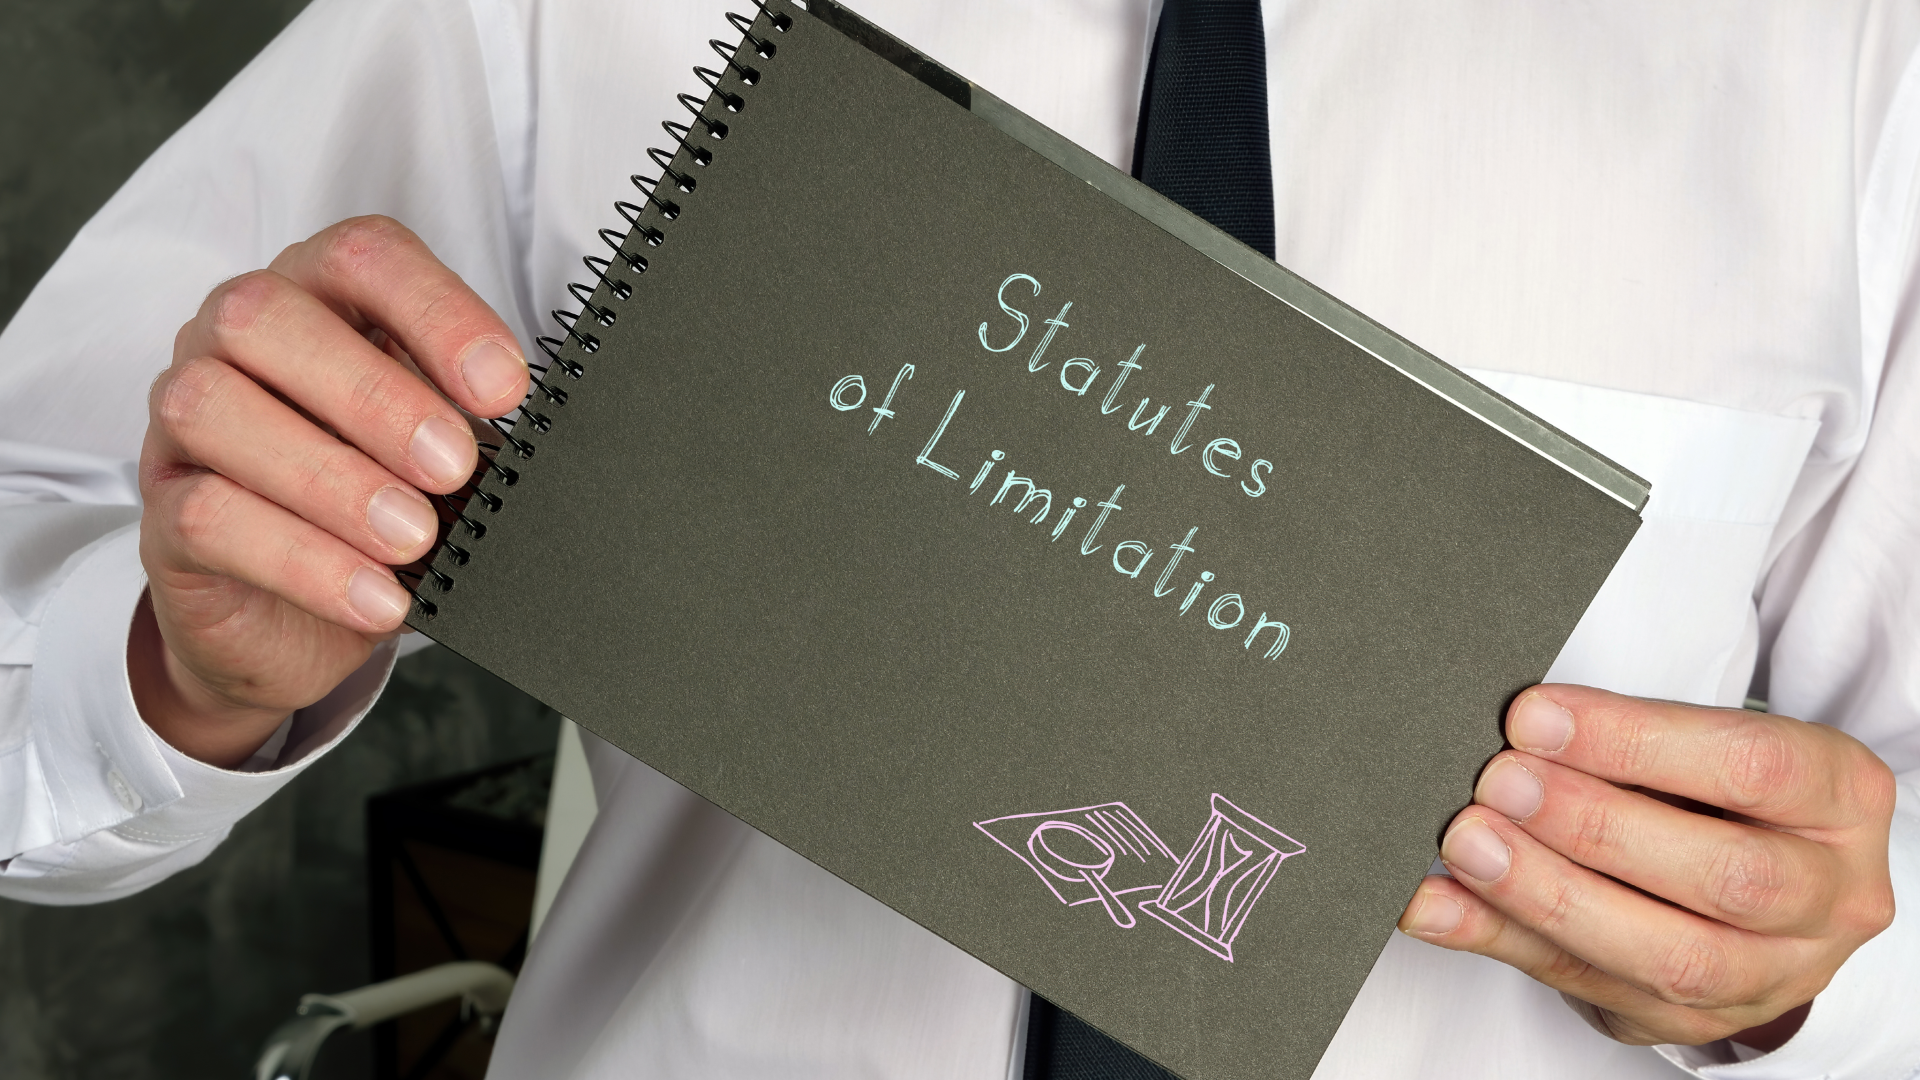 A man holding a book on statutes of limitations